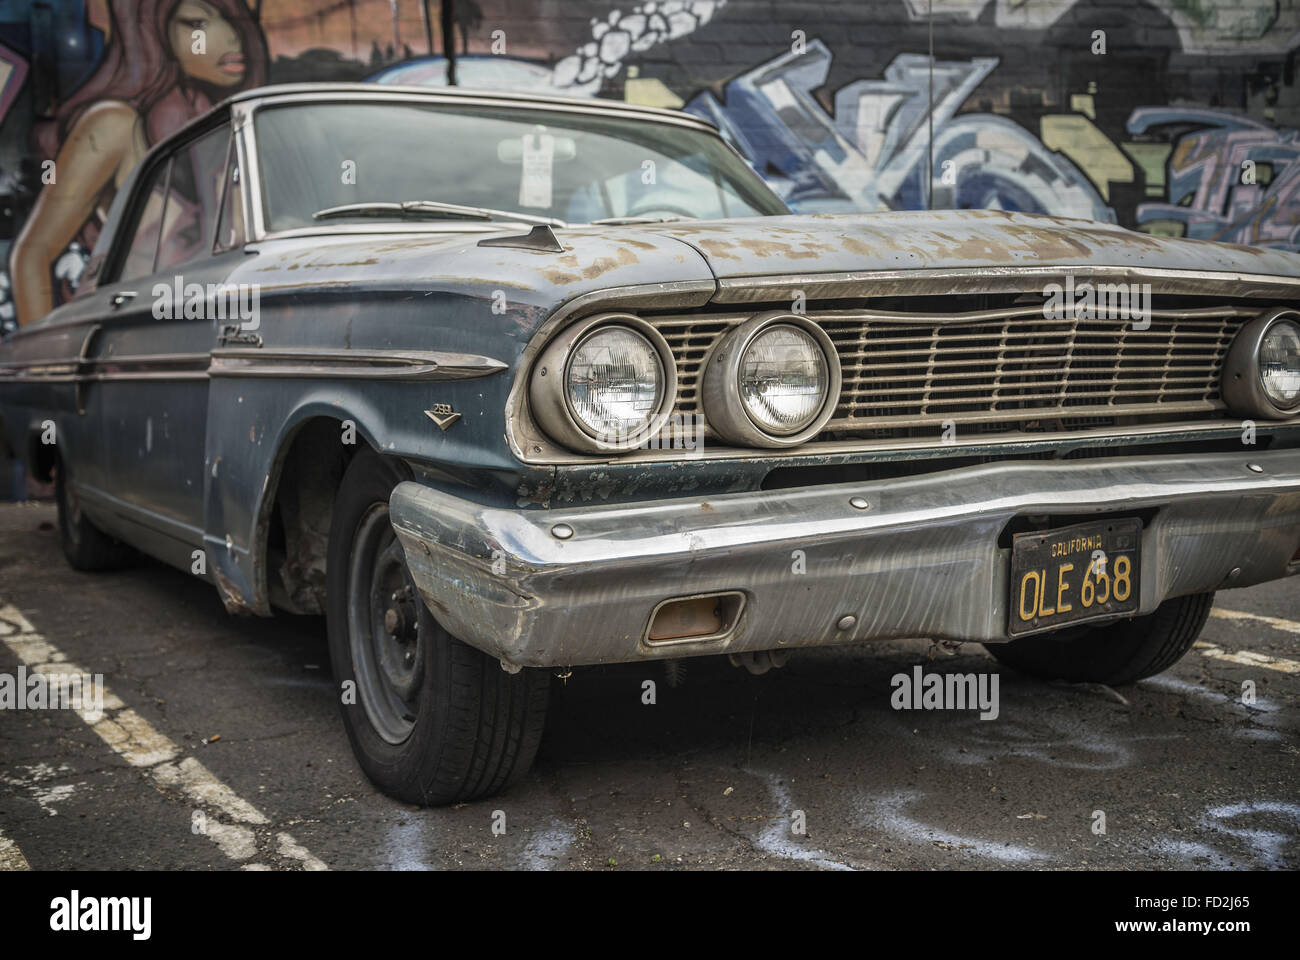 Los Angeles, California, USA. 9th Jan, 2015. A '65 Ford Fairlane sits in front of a mural-covered wall in the Arts District, Downtown LA. © Fred Hoerr/ZUMA Wire/Alamy Live News Stock Photo